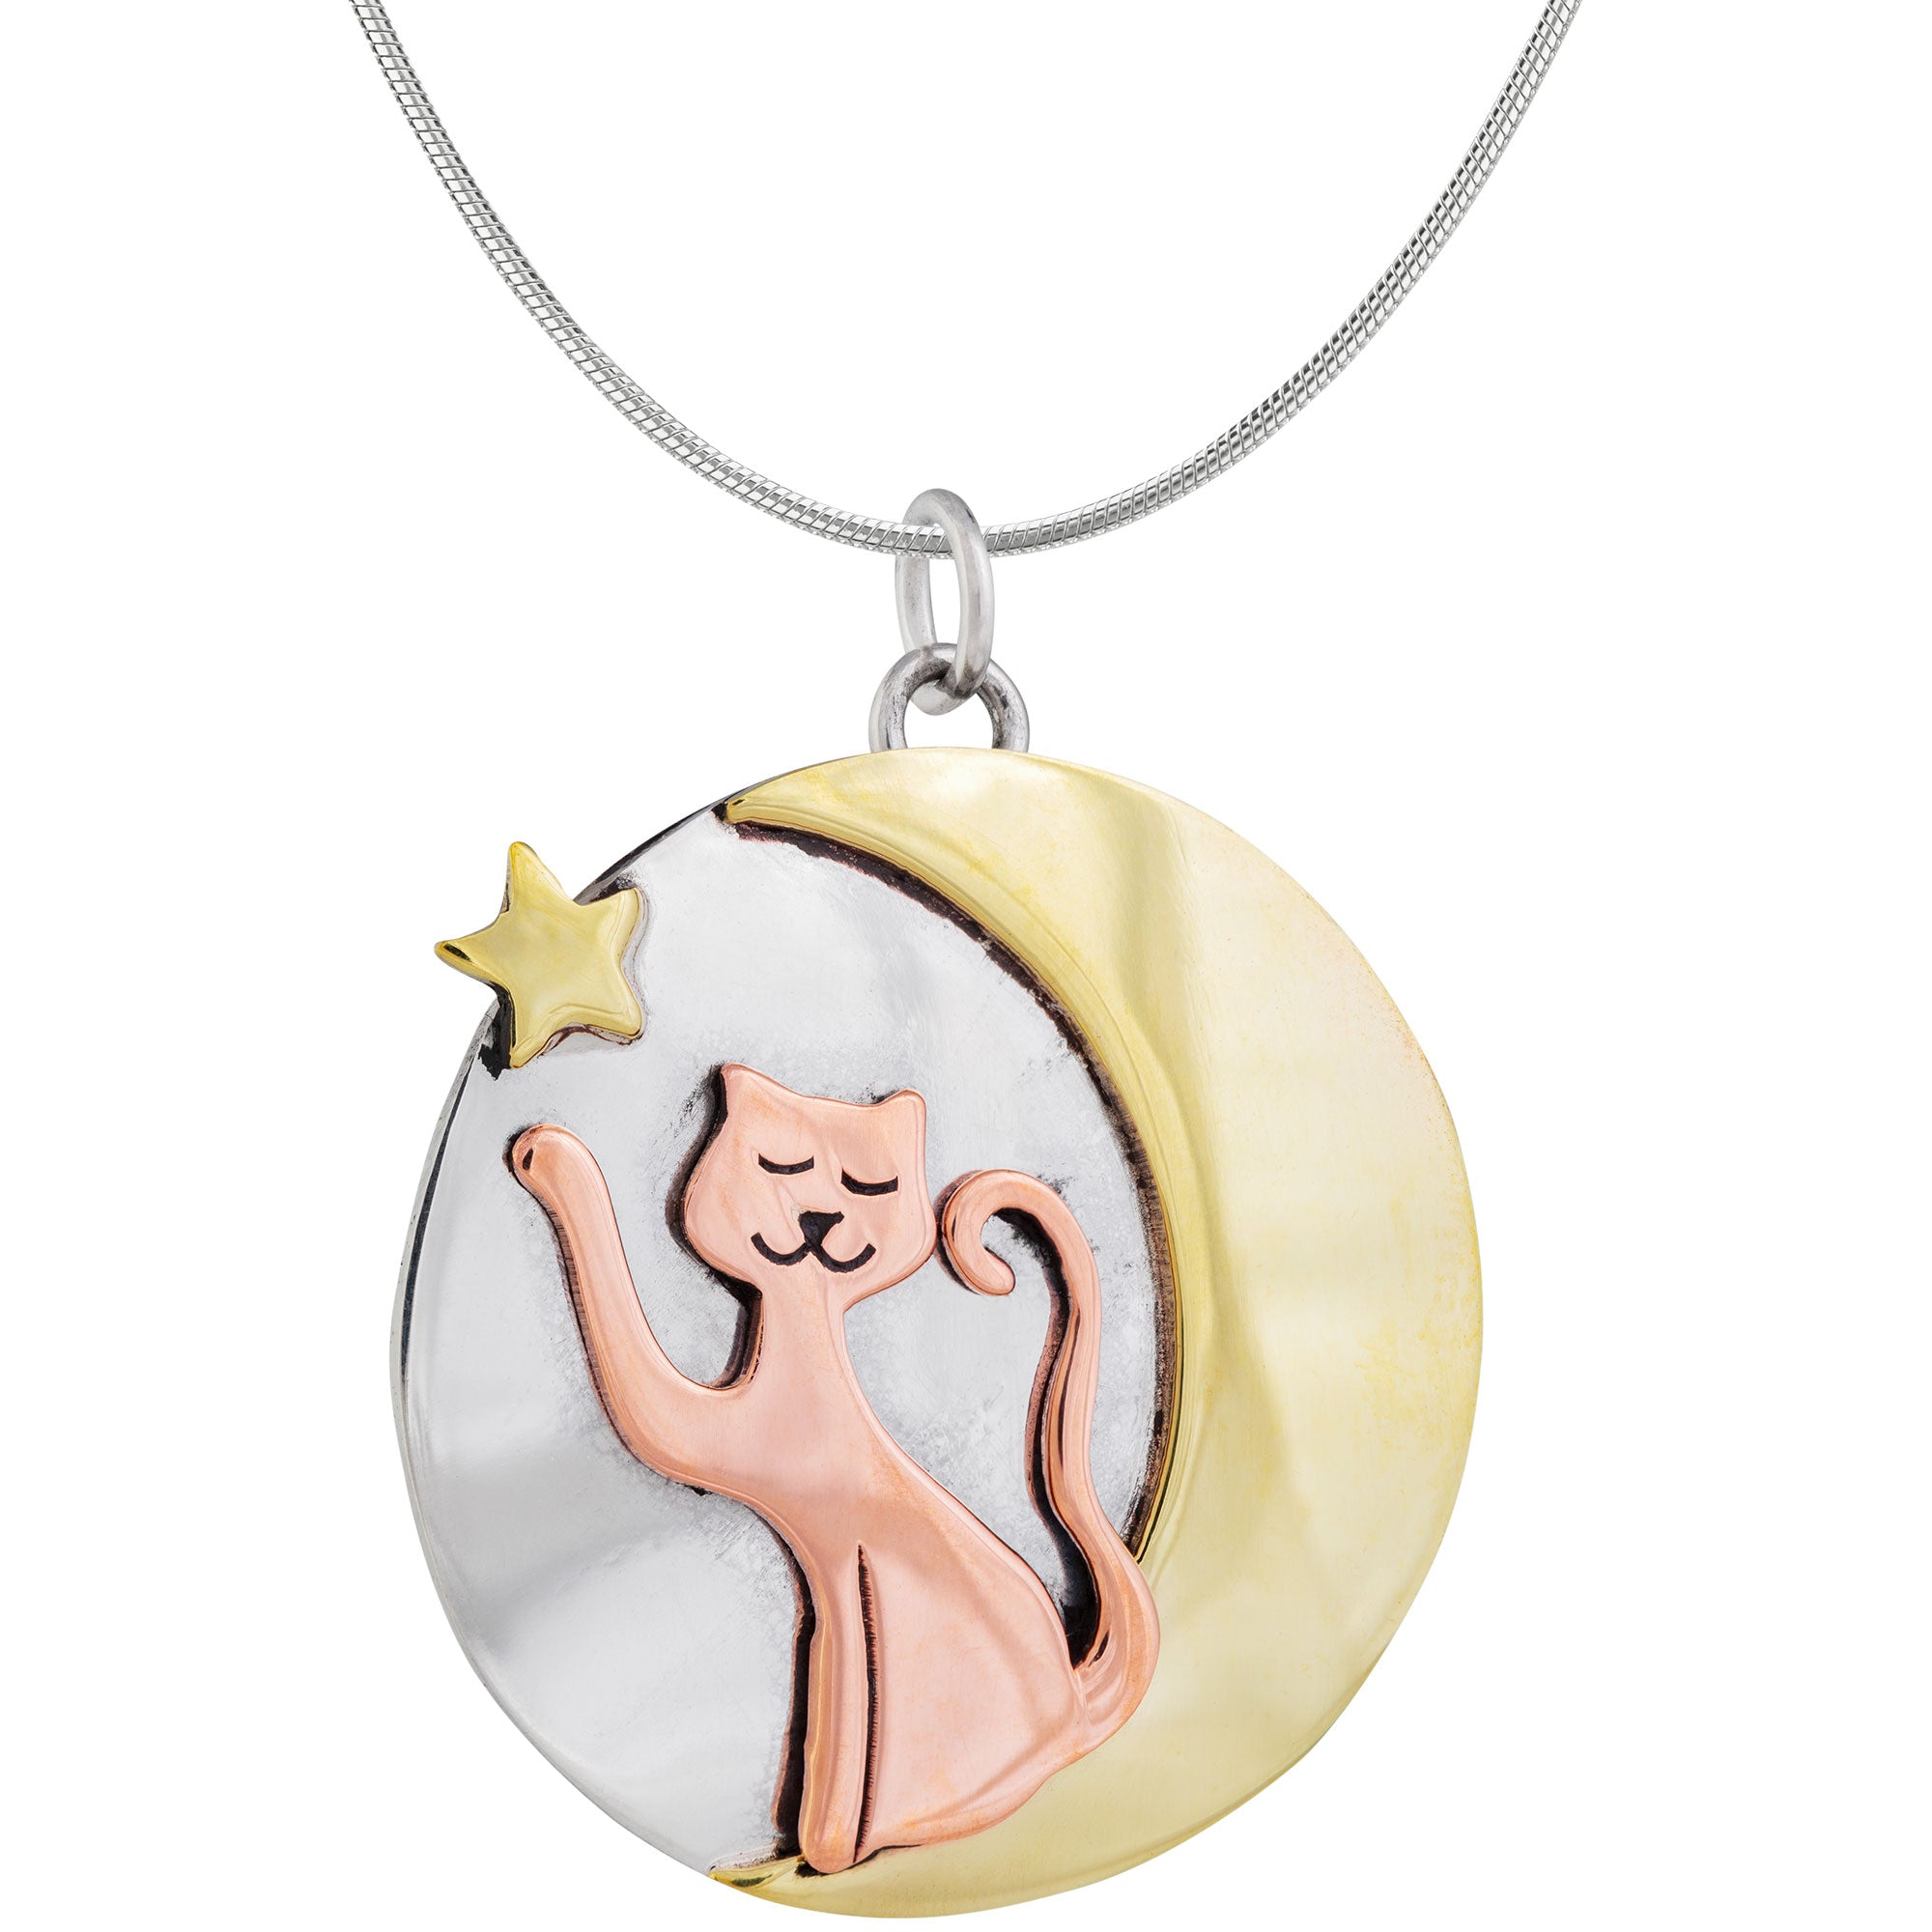 Star Bright Cat Sterling Necklace - Pendant Only